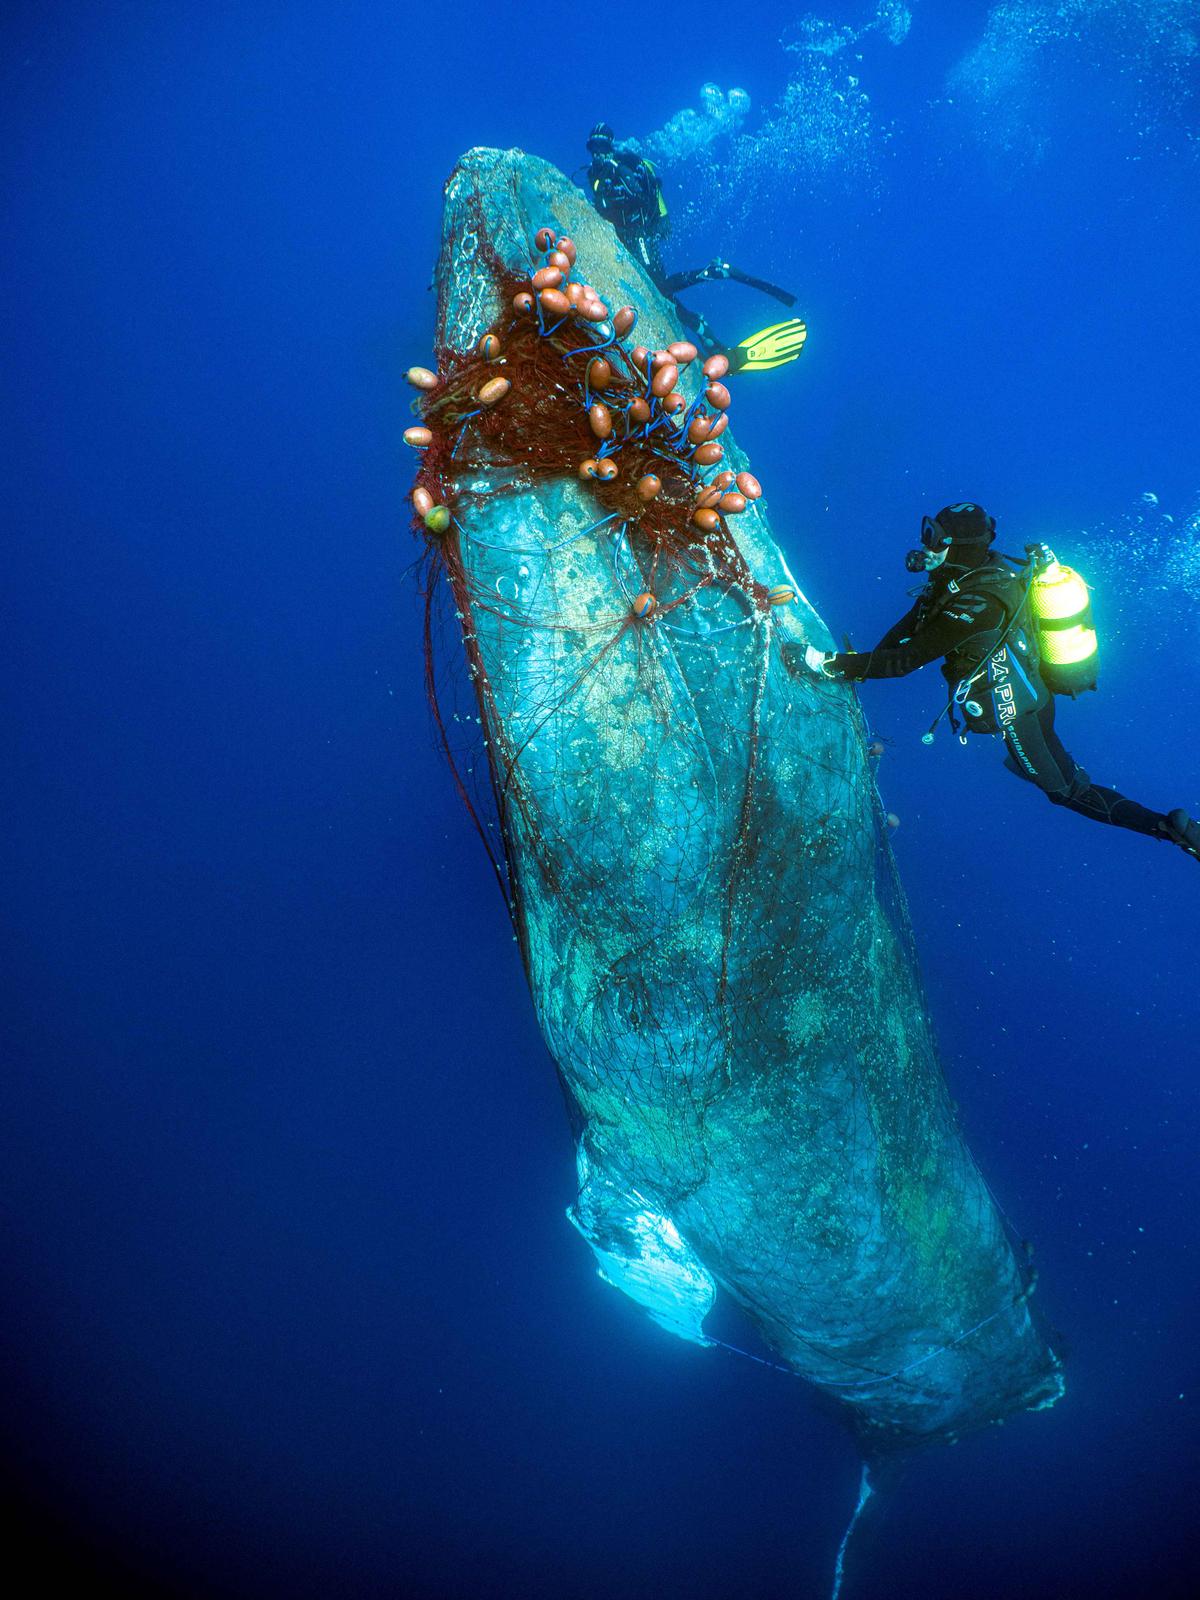 Spanish divers attempt to cut a drift net off a 12-meter-long humpback whale that got entangled in it near Cala Millor beach in the Balearic island of Mallorca, Spain, on May 20, 2022. (Reuters/Pedrosub)